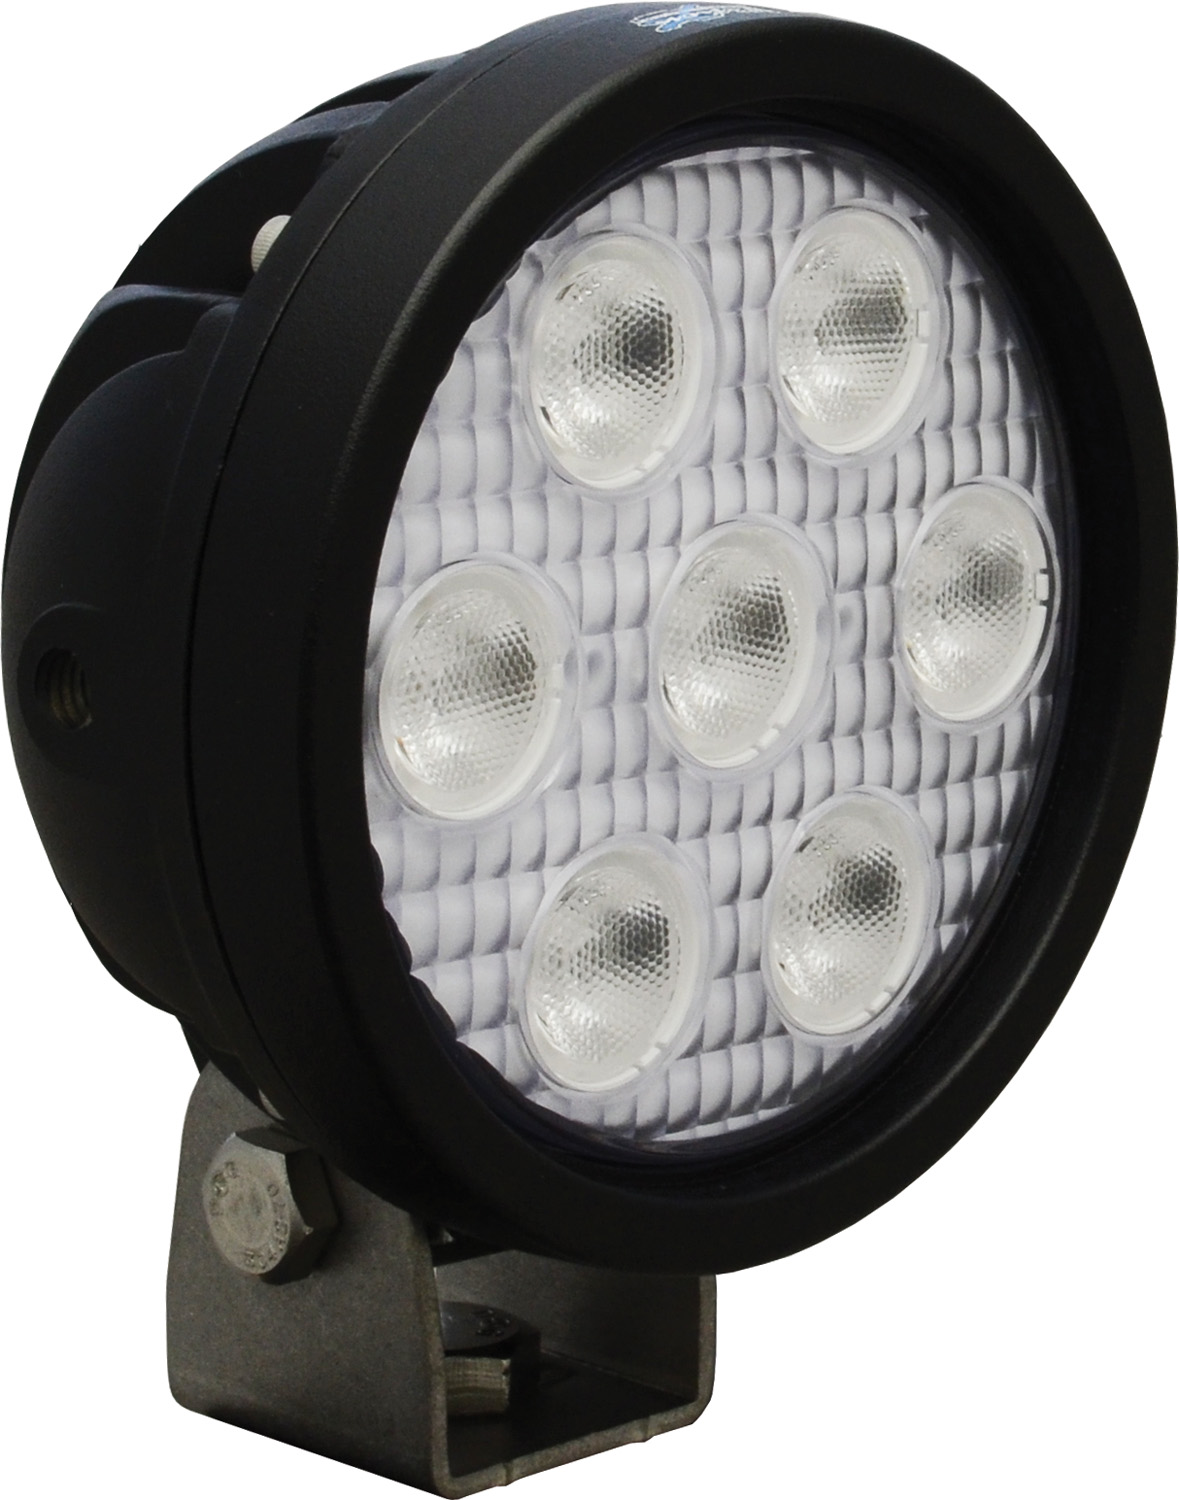 4" ROUND UTILITY MARKET BLACK 7 3W RED LED'S 40ç WIDE - Click Image to Close